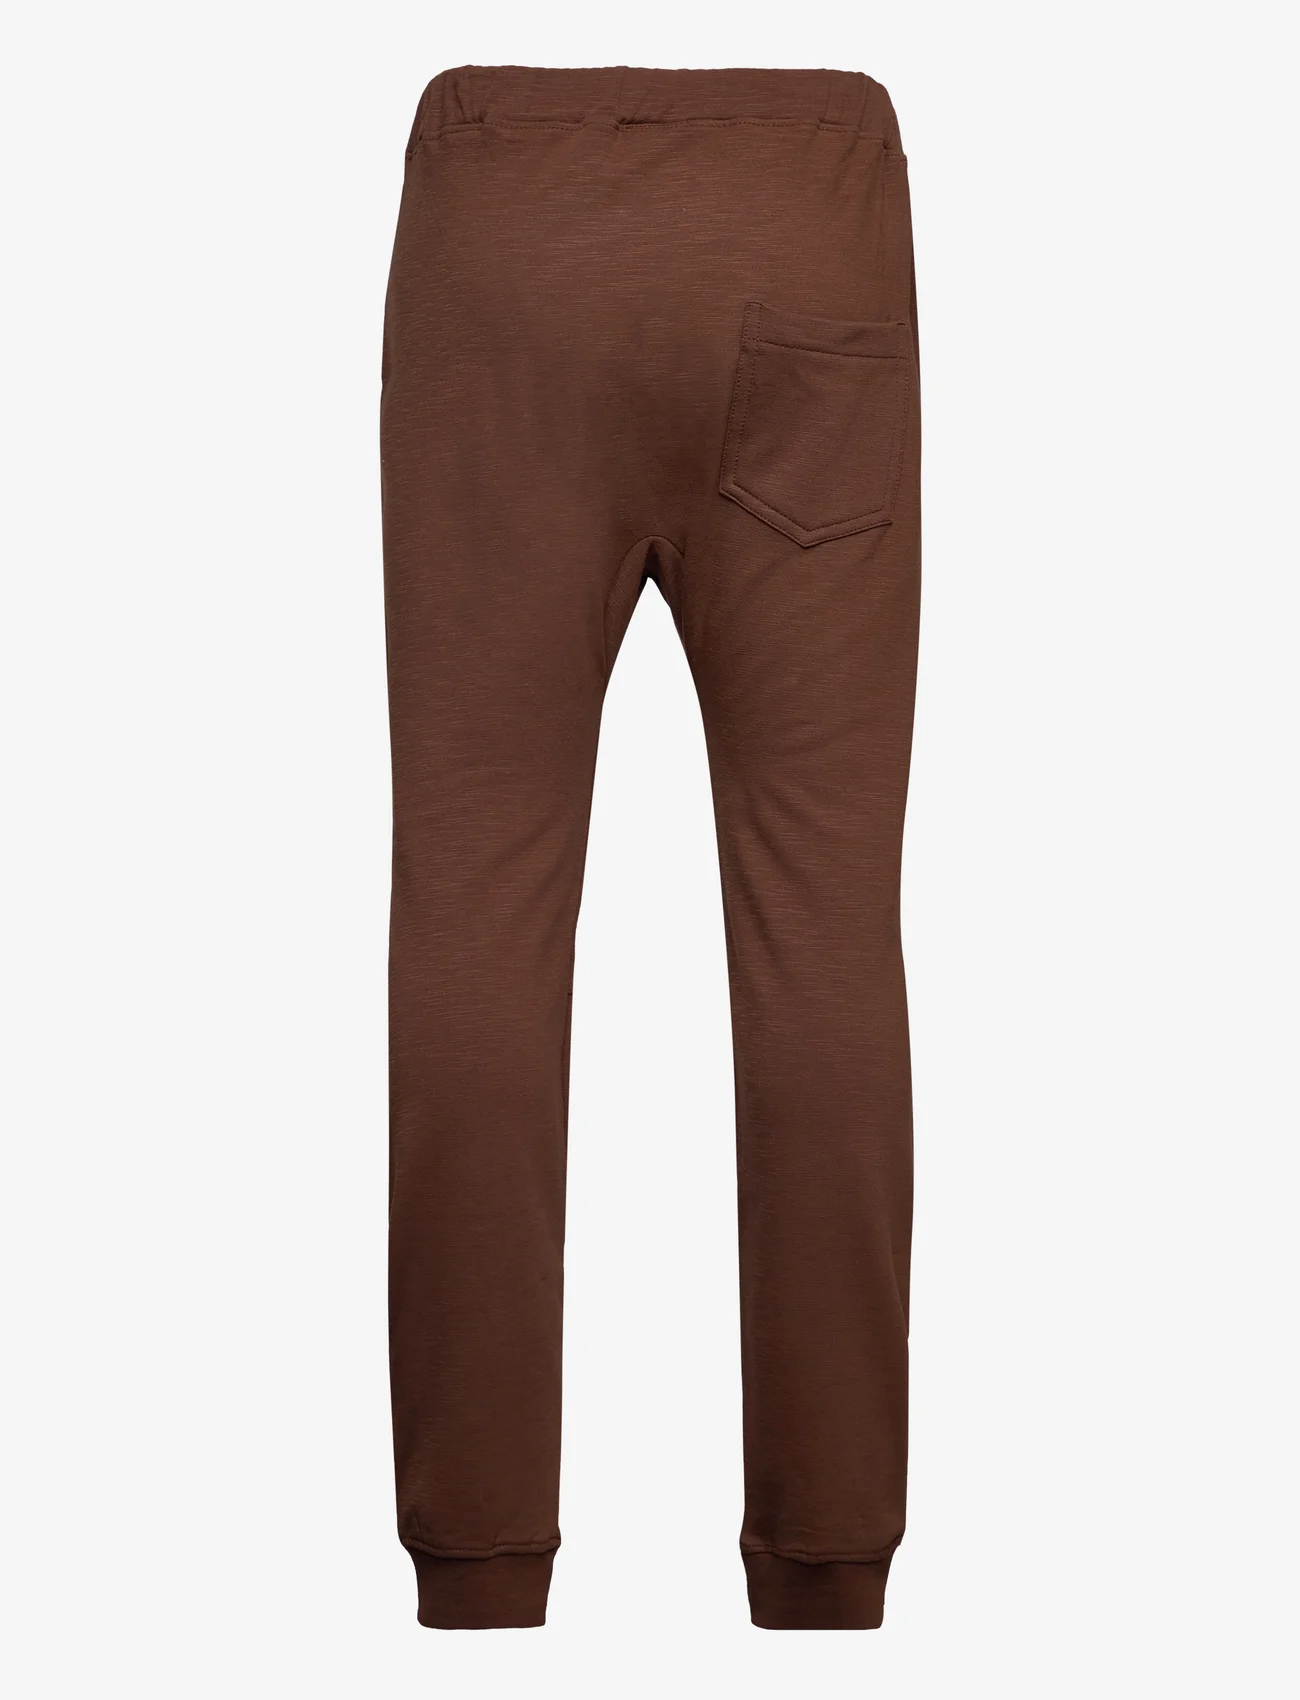 Hust & Claire - Georg - Joggers - lowest prices - chestnut - 1